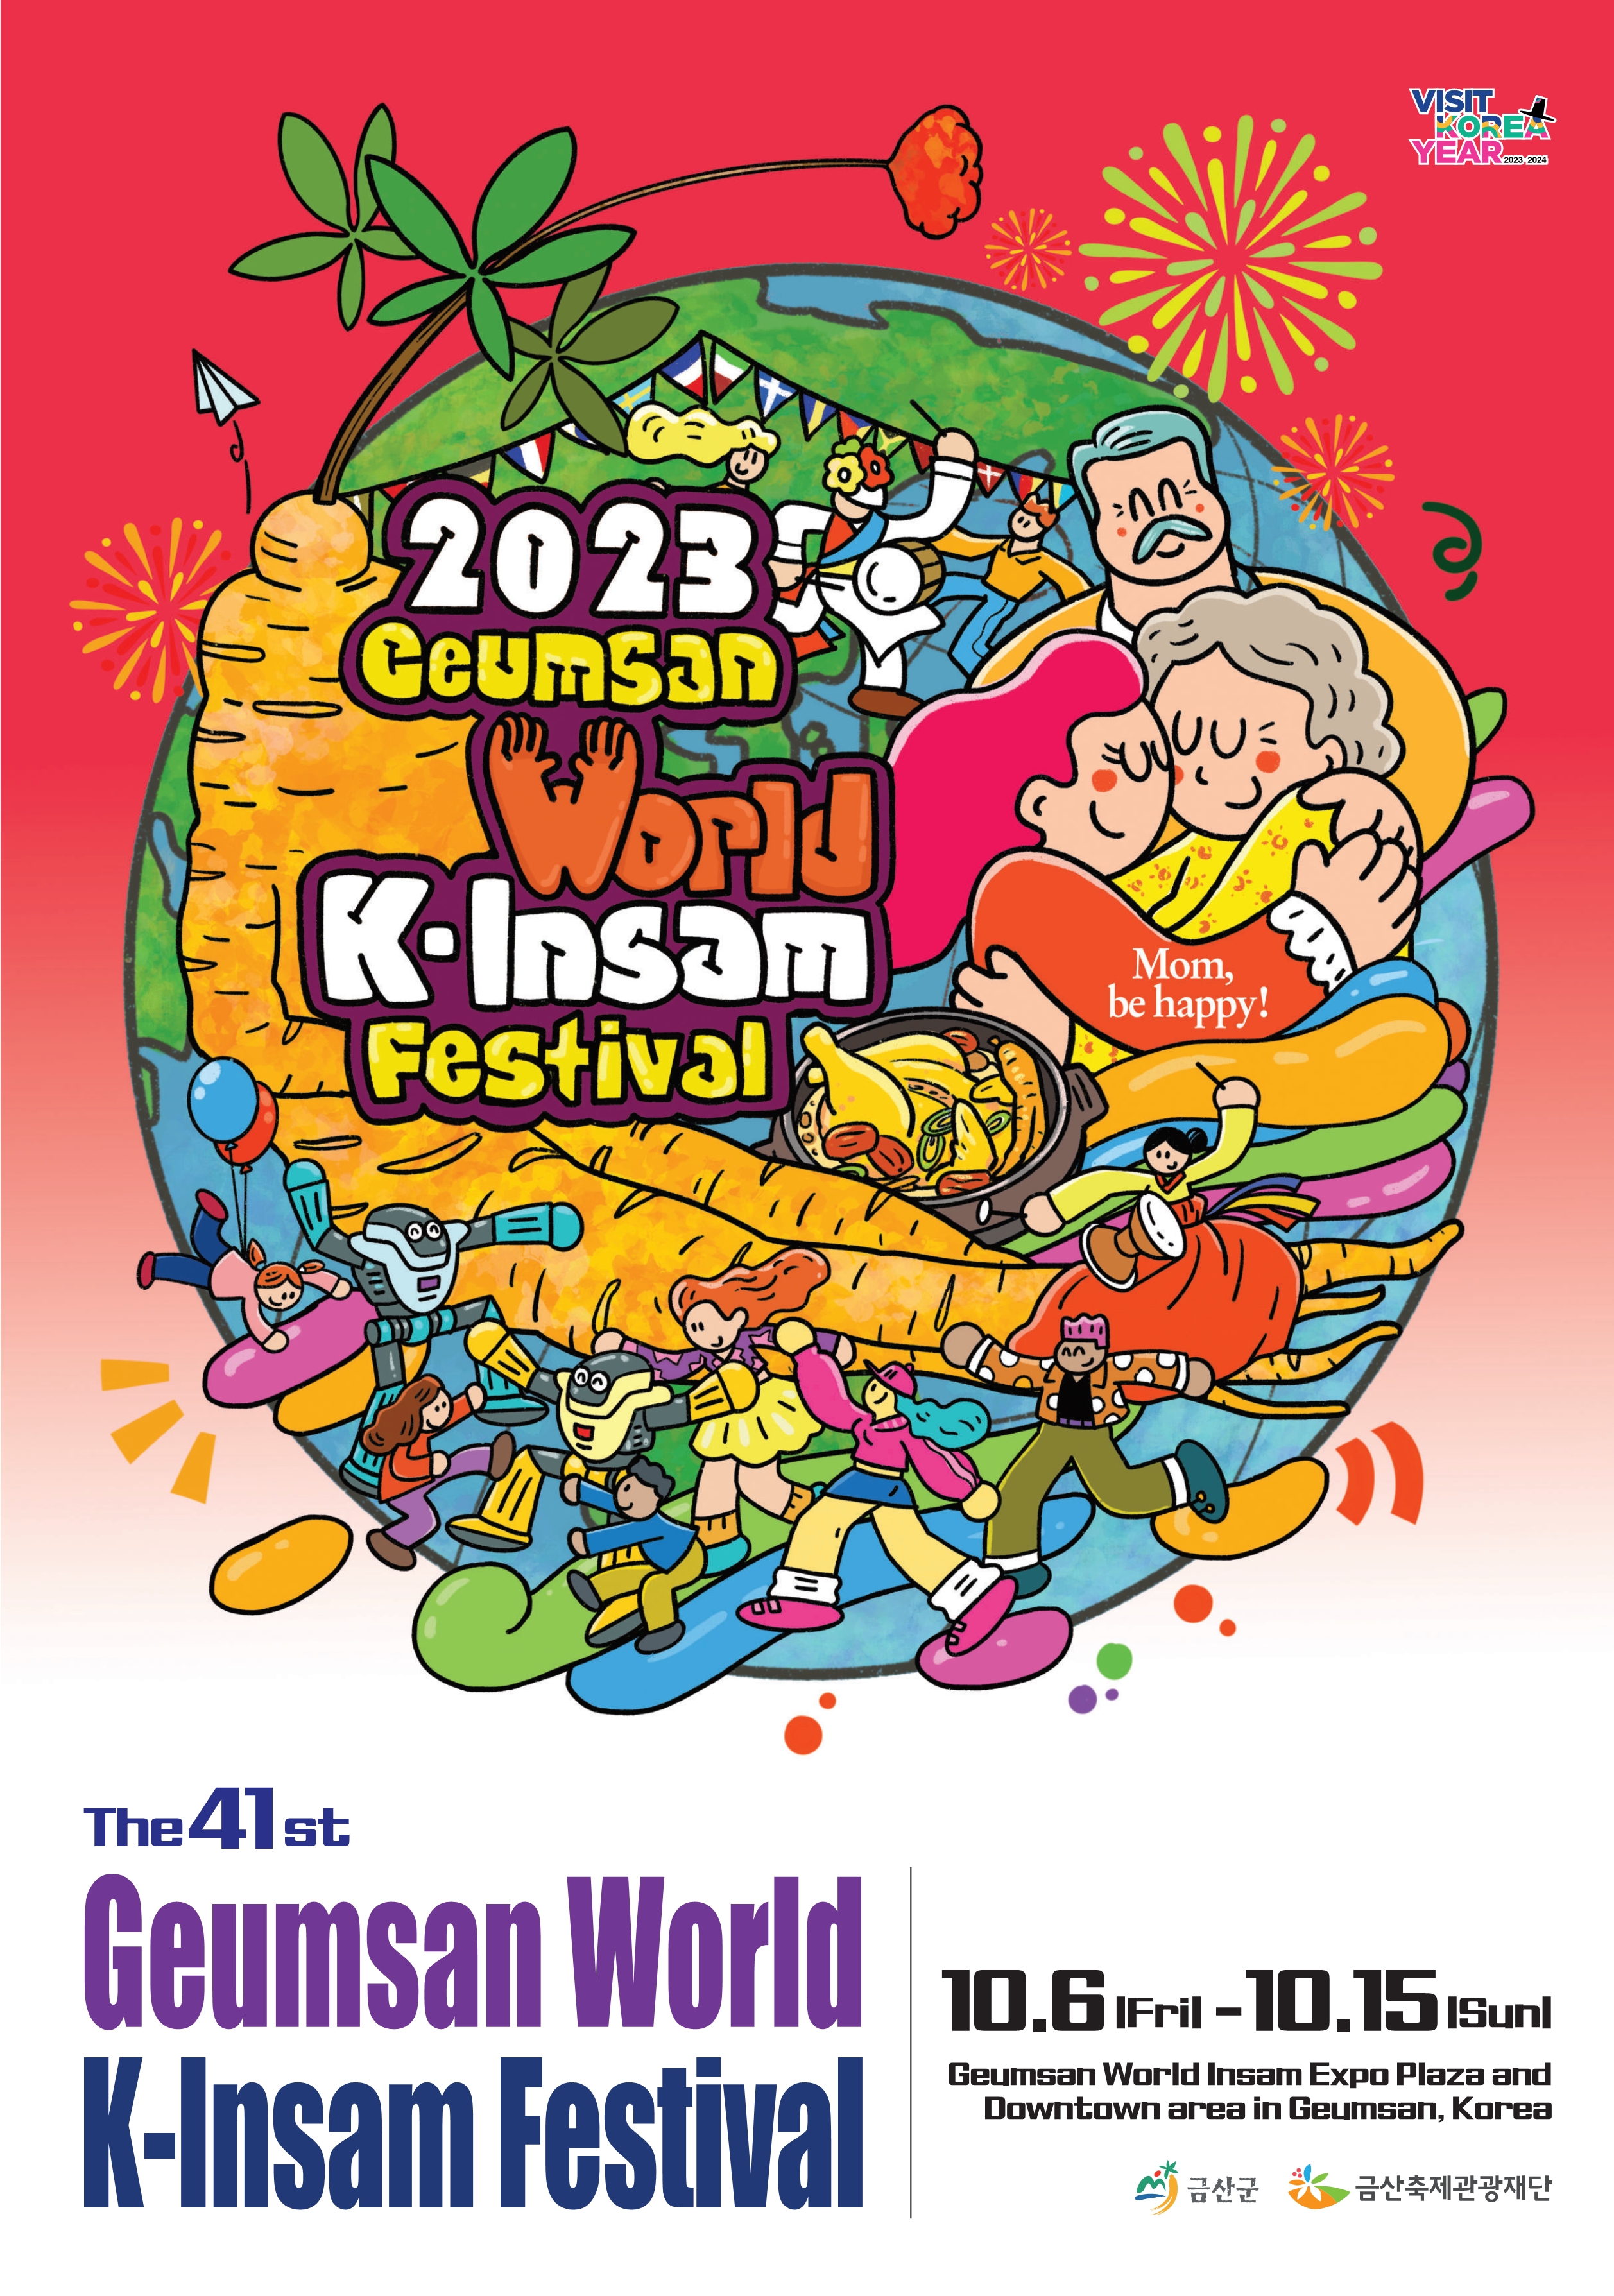  the 41st geumsan world k-insam festival 10.6-10.15 Geumsan World Insam Expo Plaza and